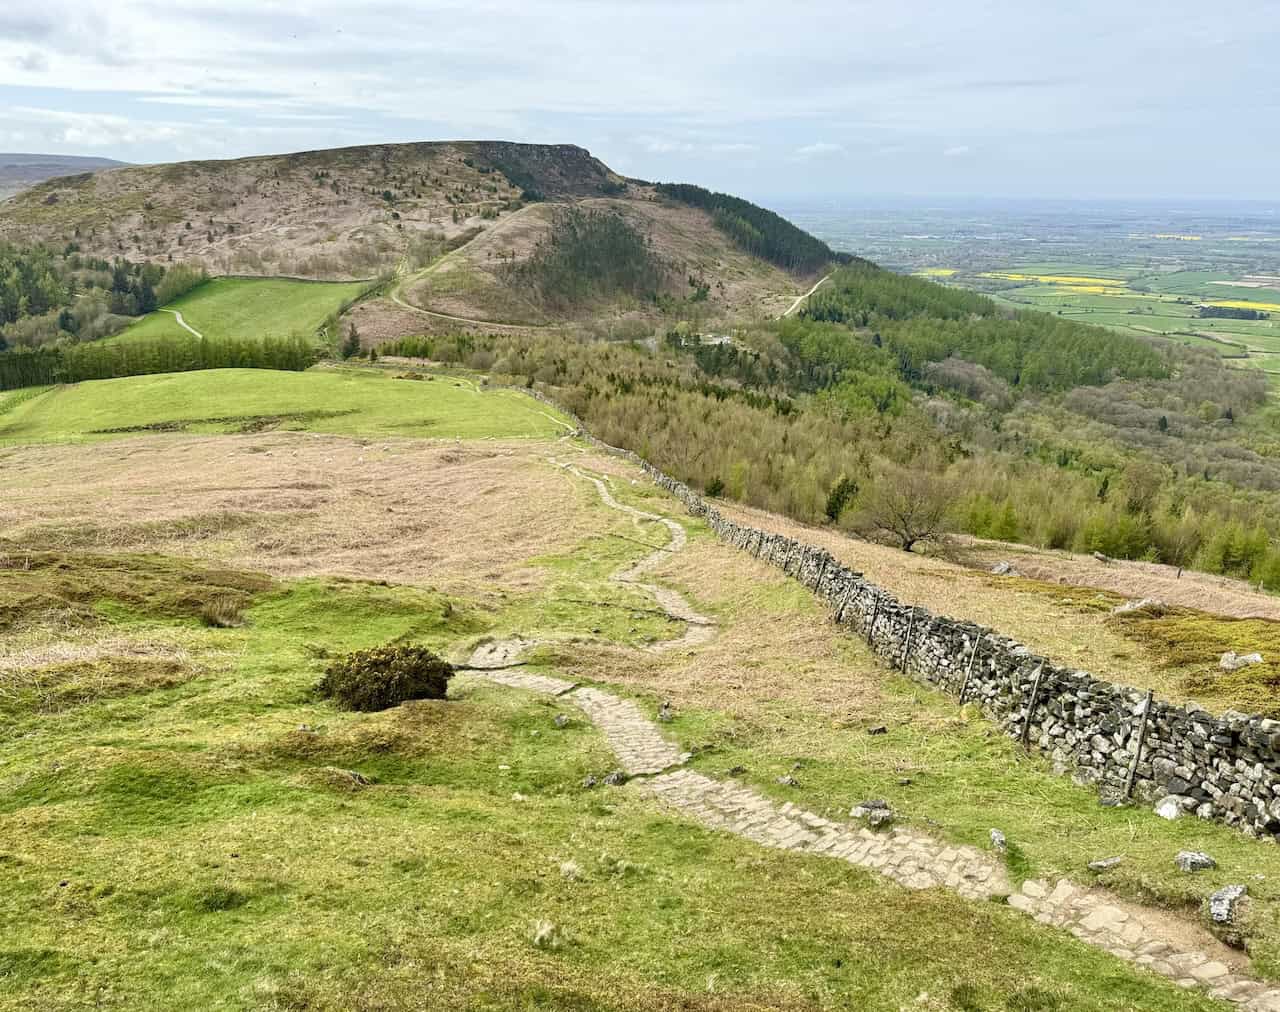 The descent from Carr Ridge down to the car park concludes our remarkable Lordstones walk.